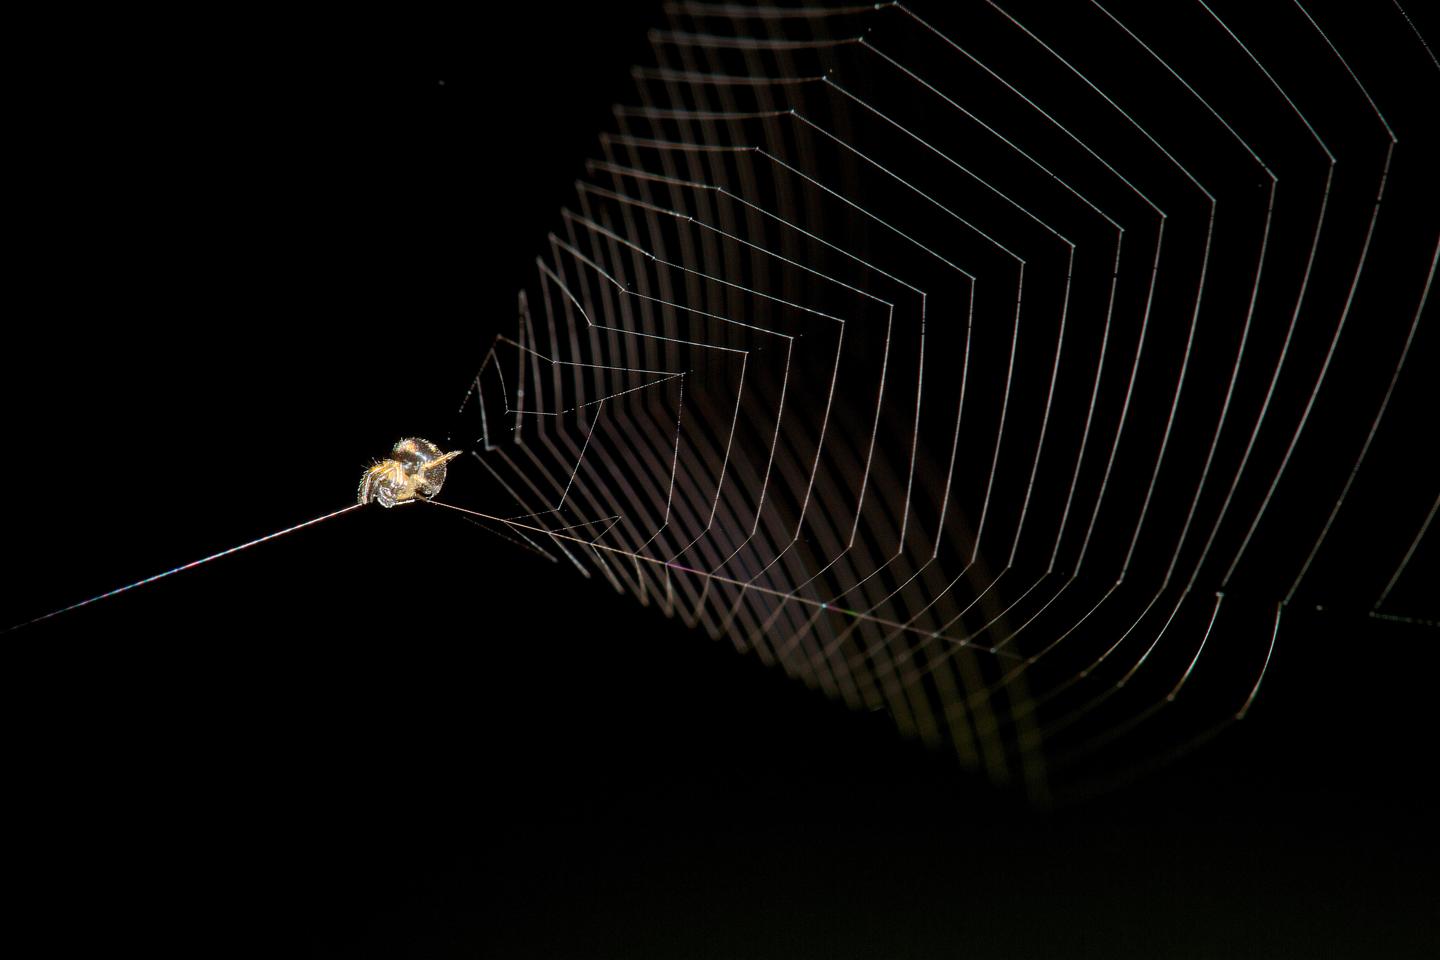 Slingshot Spider Ready to Launch Its Web